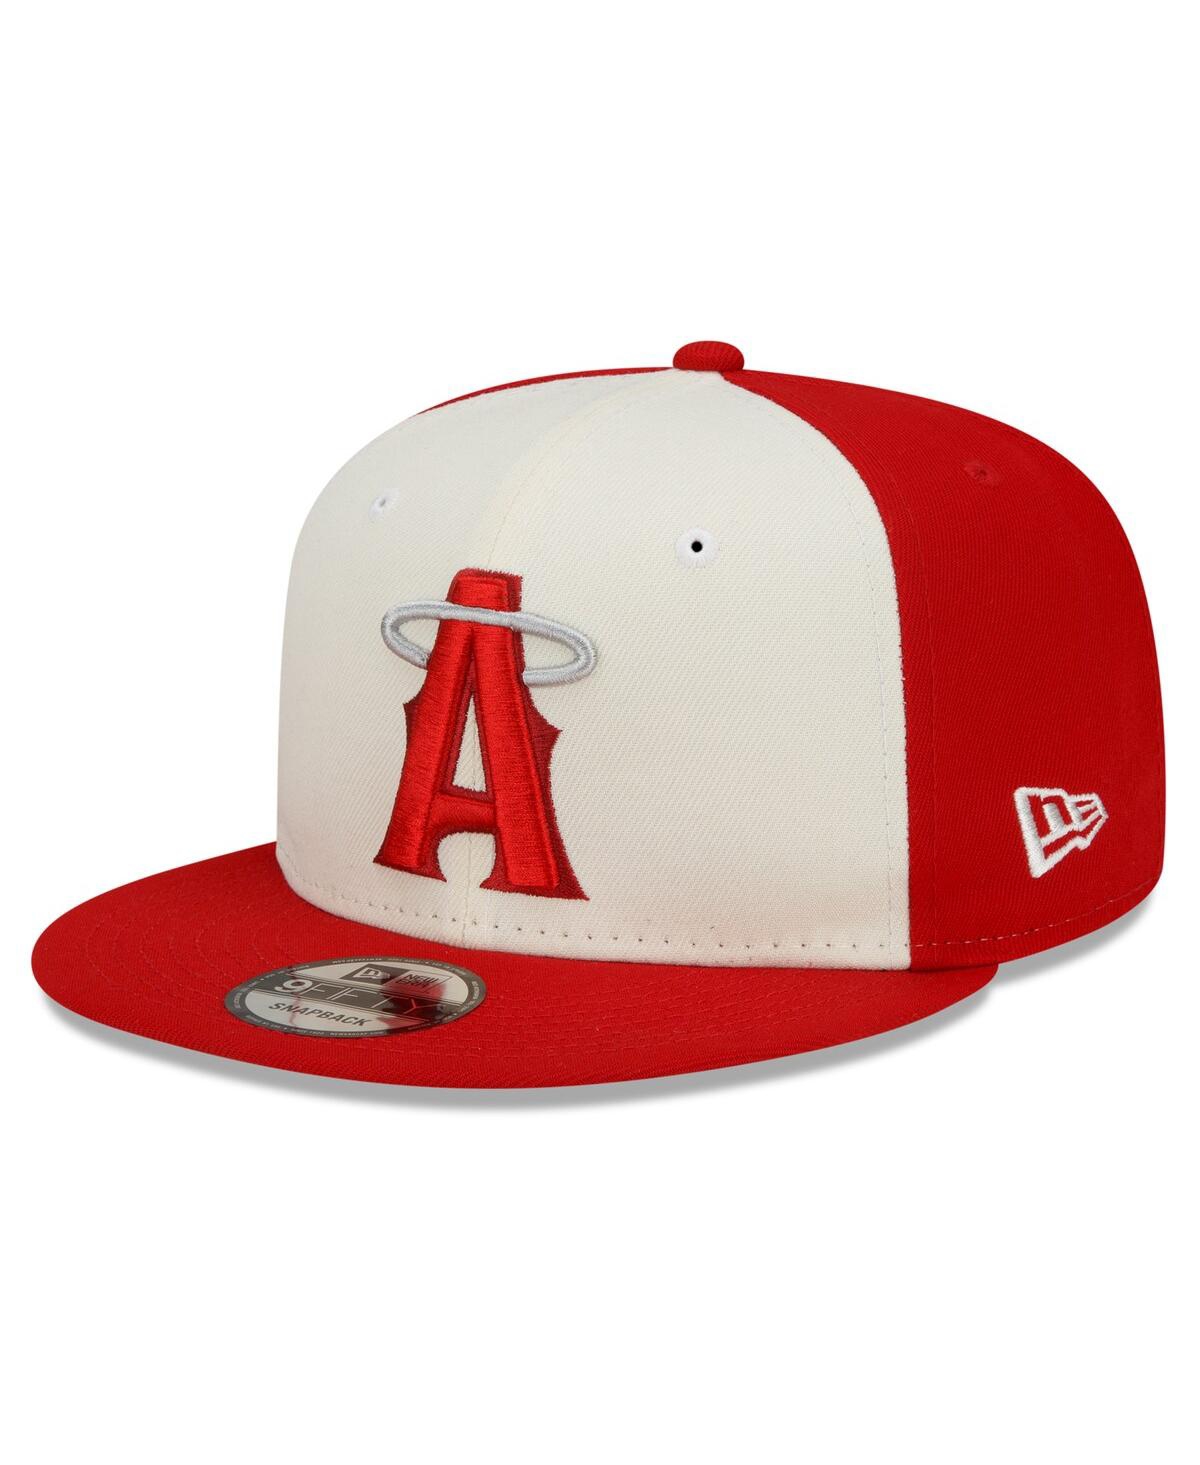 NEW ERA MEN'S NEW ERA RED LOS ANGELES ANGELS CITY CONNECT 9FIFTY SNAPBACK ADJUSTABLE HAT